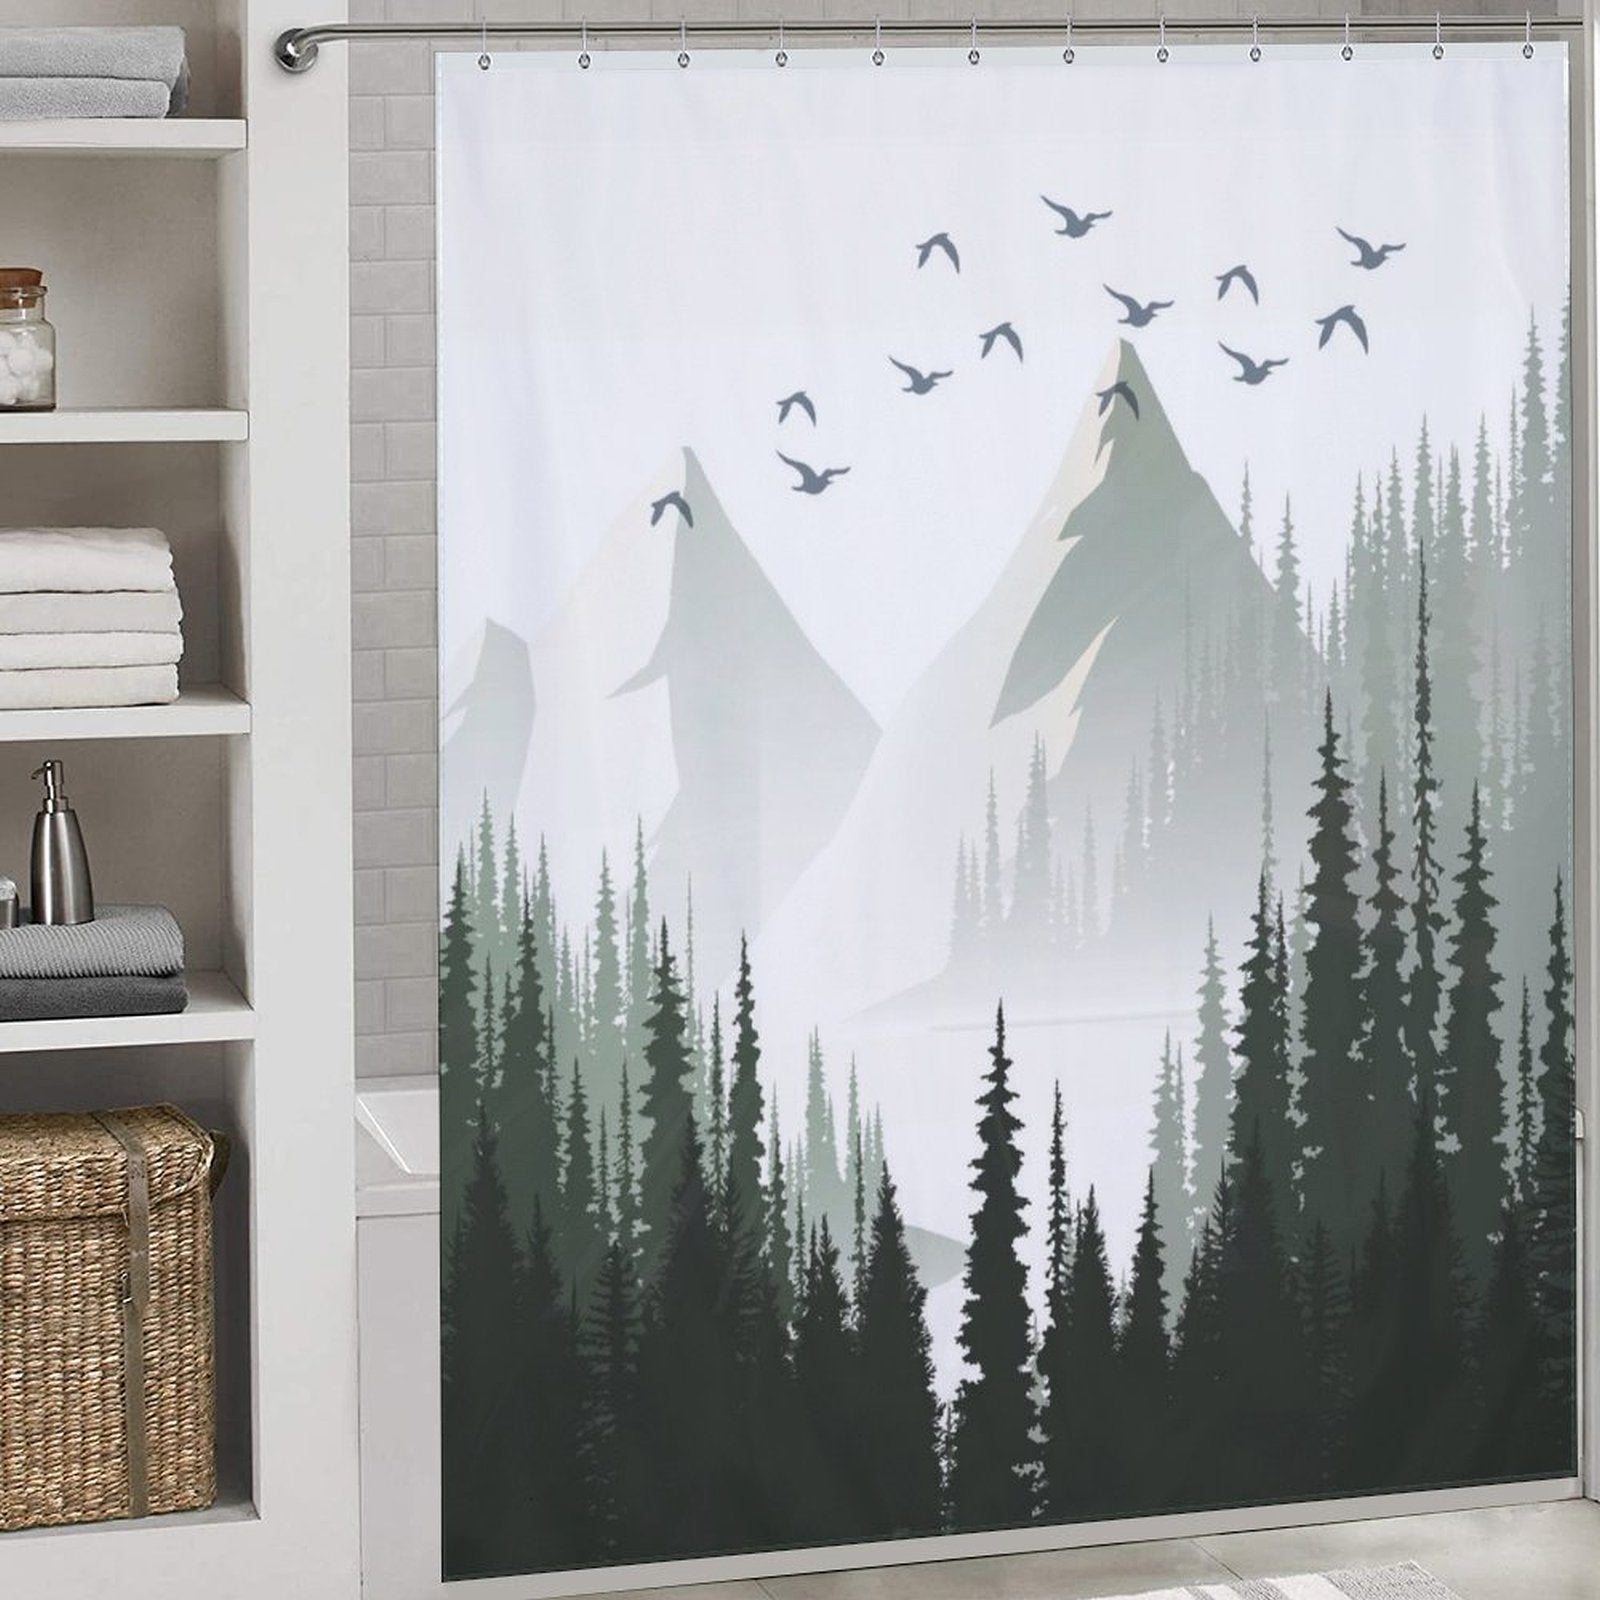 Transform your bathroom into a serene escape with the Green Misty Forest Shower Curtain Ombre Sage Green White Nature Tree Mountain Woodland-Cottoncat by Cotton Cat, showcasing an intricate mountain and forest design. Evergreen trees and flying birds enhance the nature scene, beautifully complementing shelves laden with towels and a woven basket.